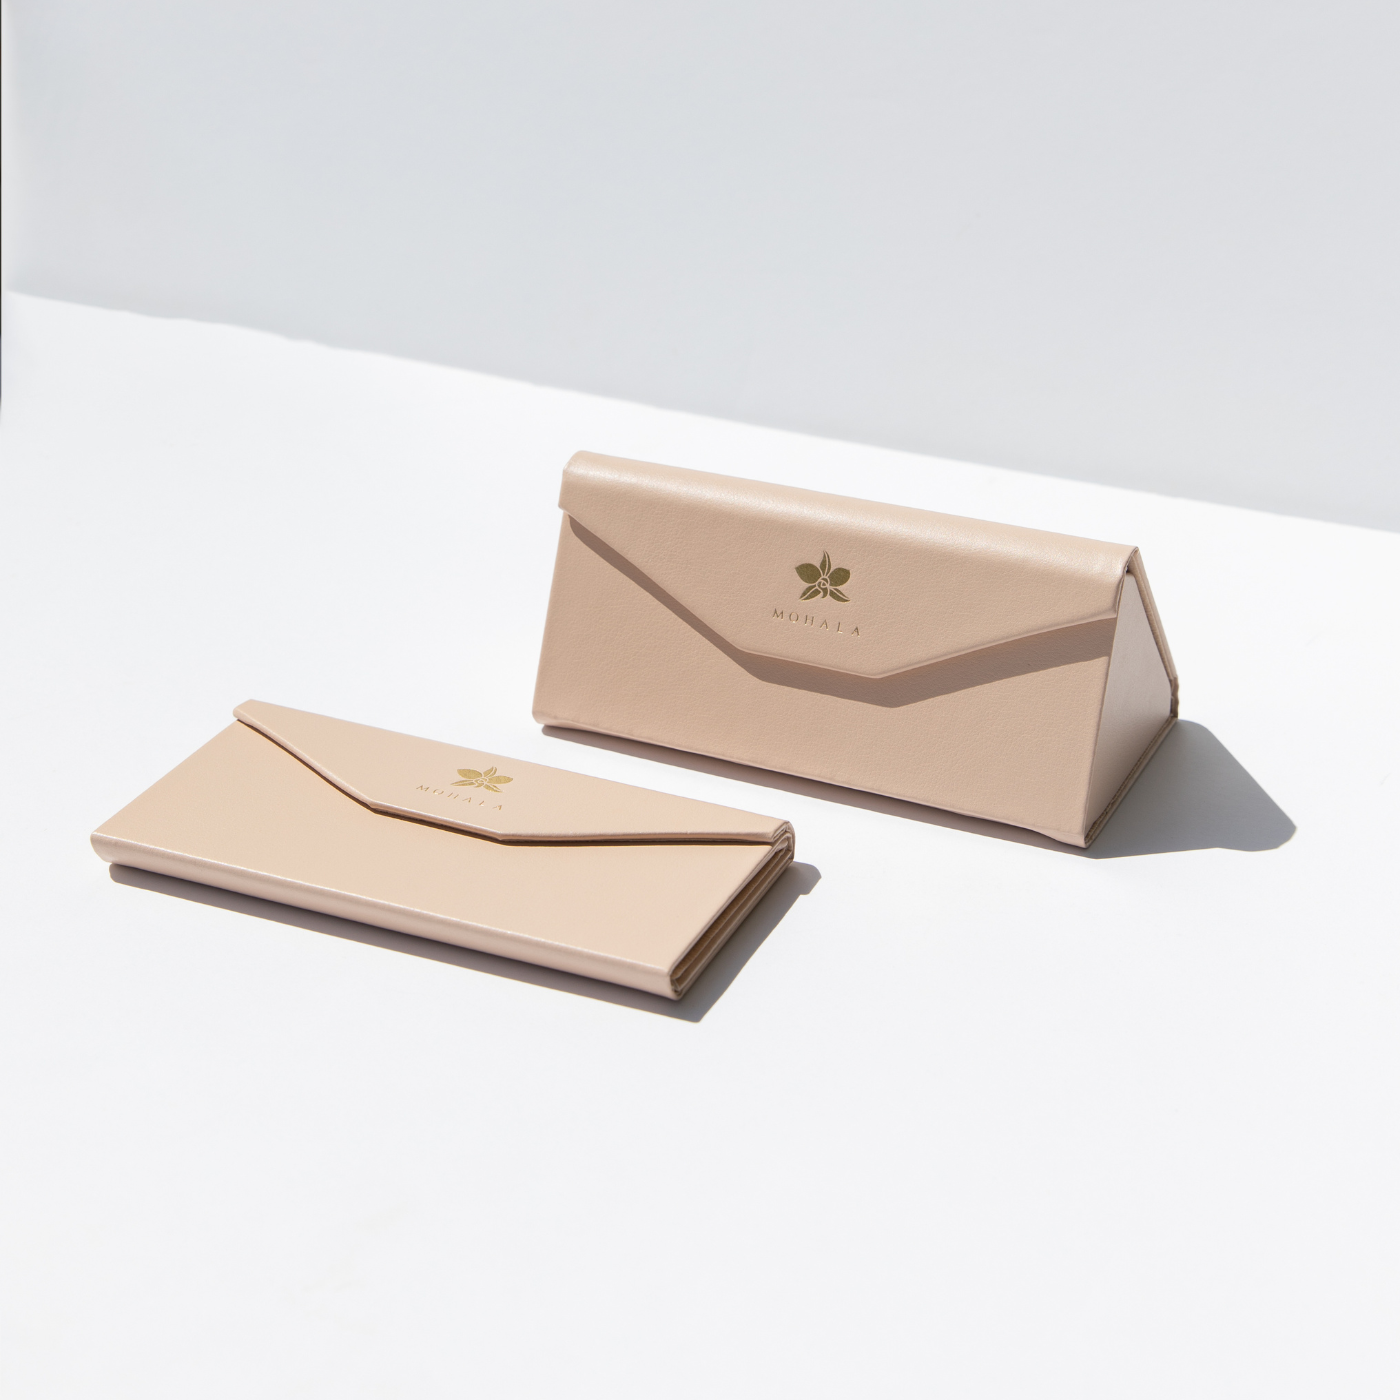 Vegan Leather Collapsible Case in Sand